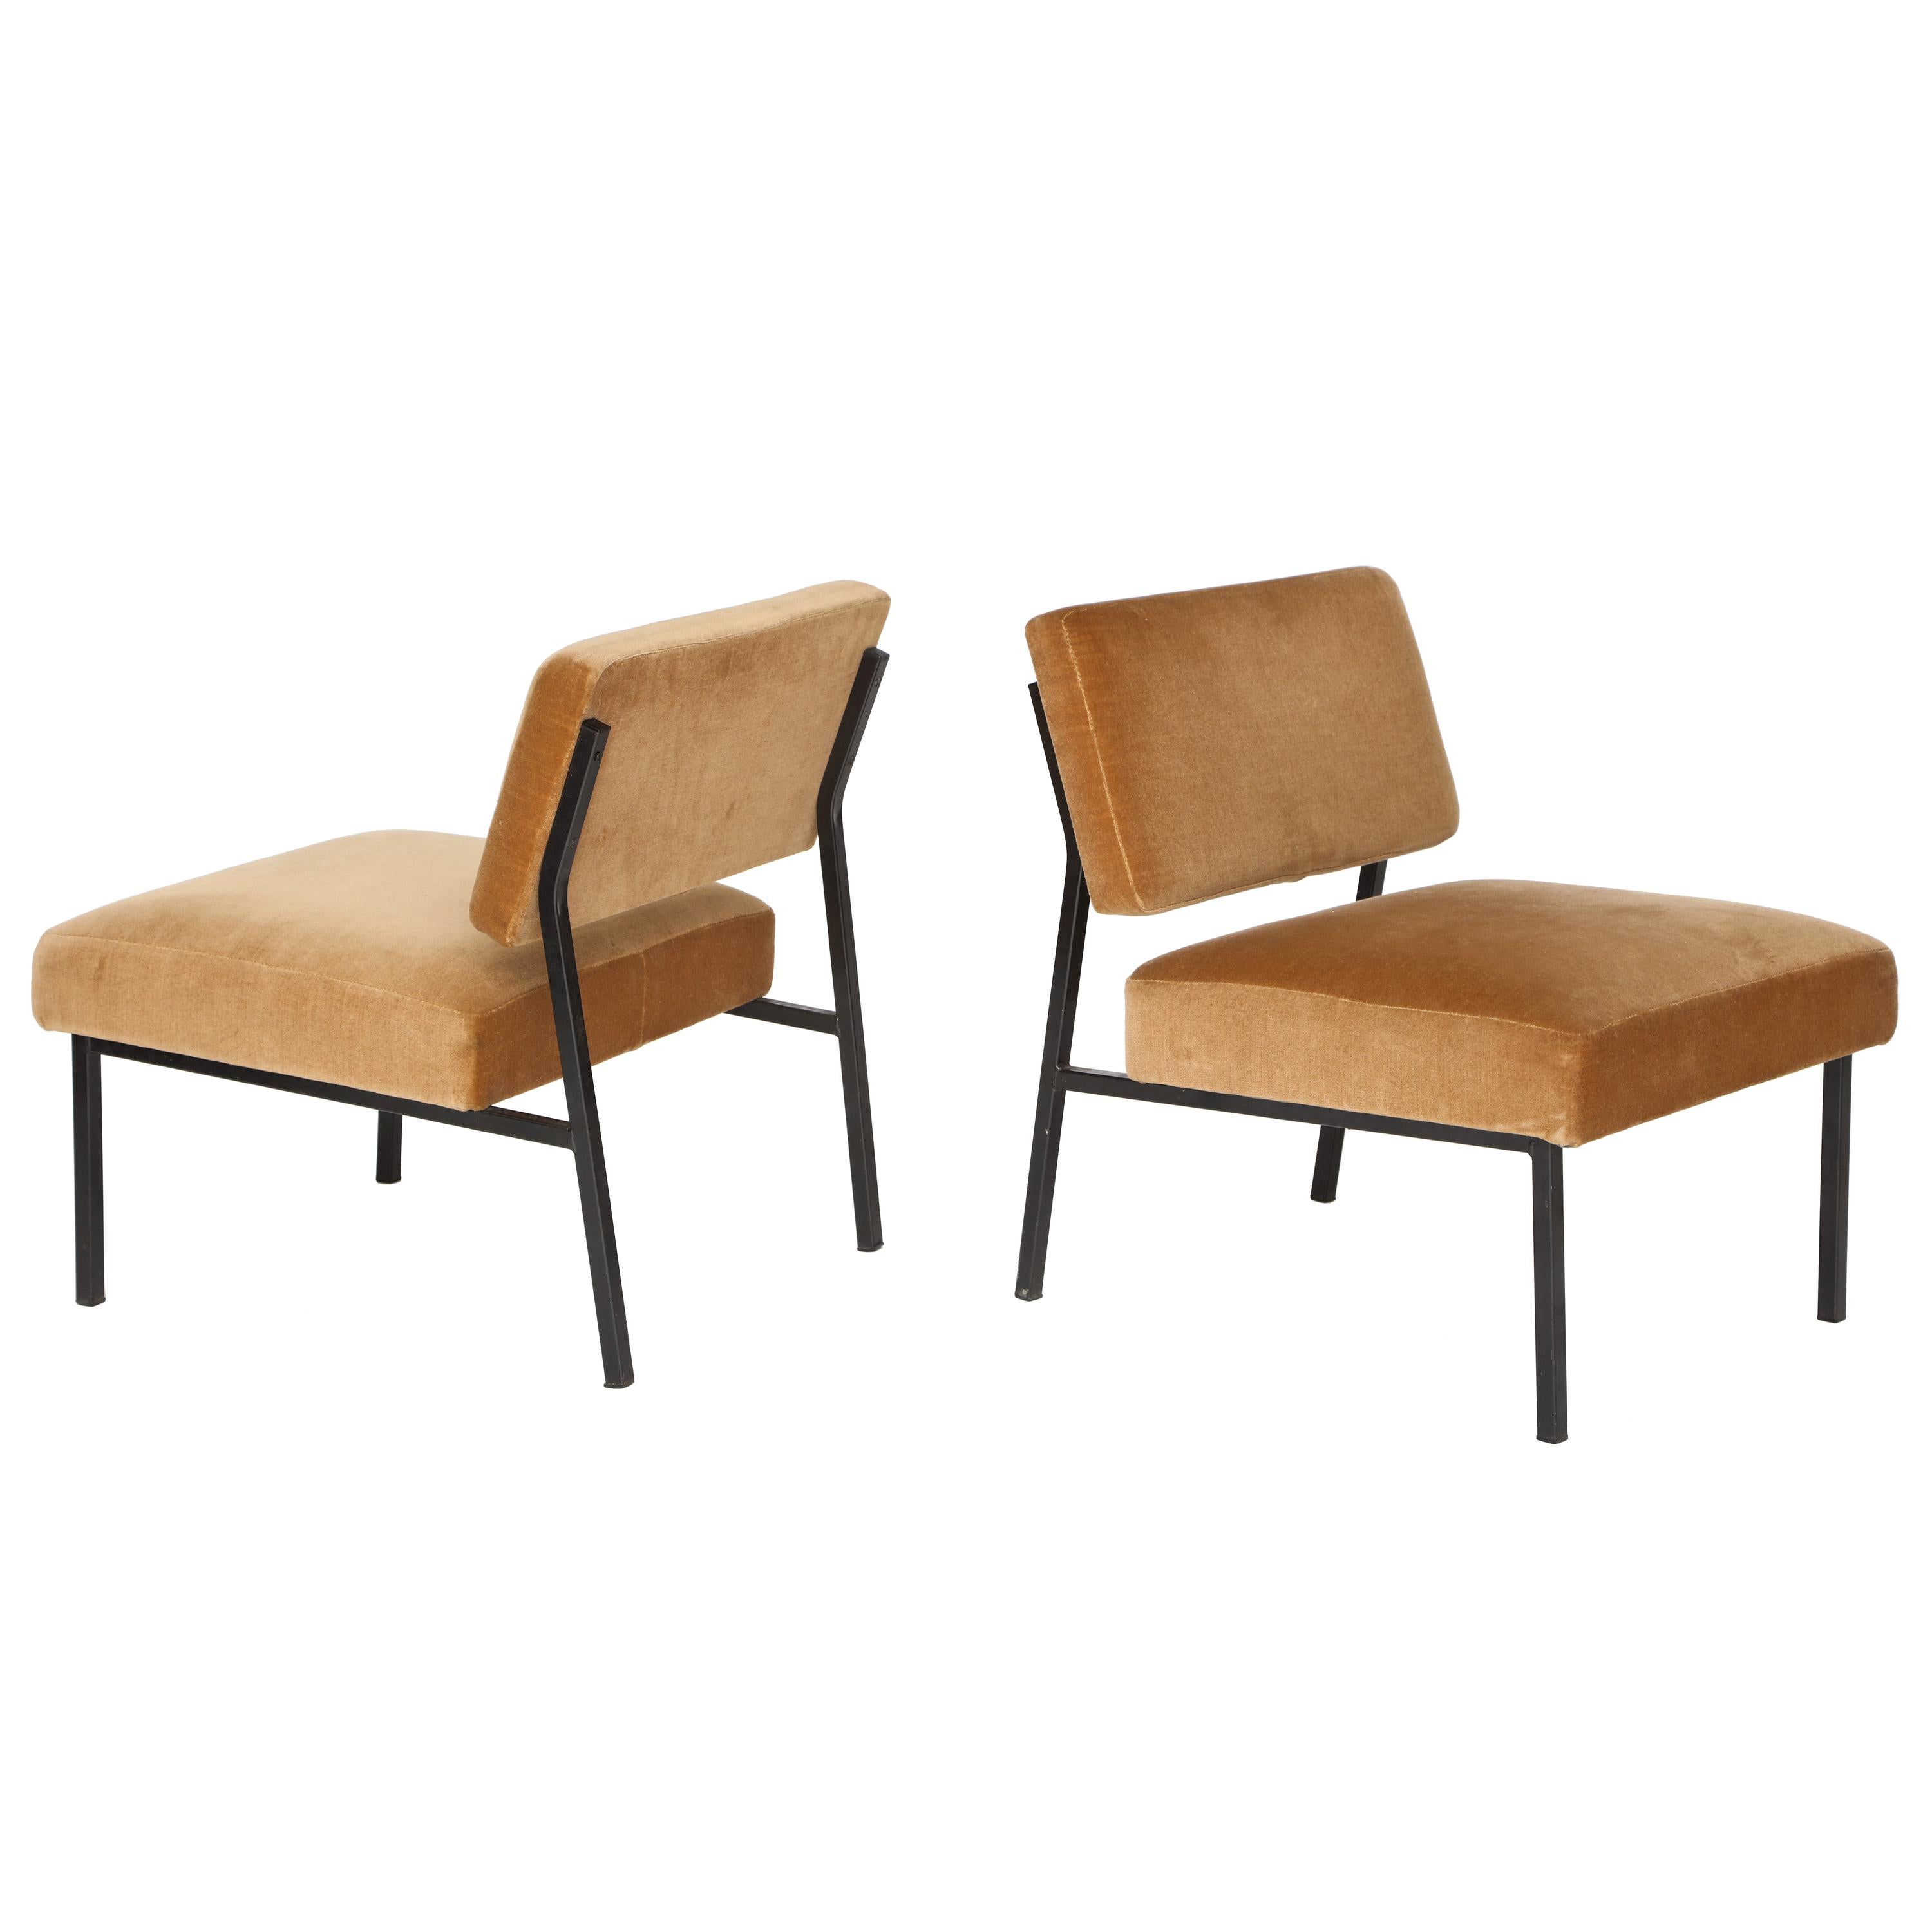 Airborne Iron and Velvet Slipper Chairs Midcentury Brown 1950, France